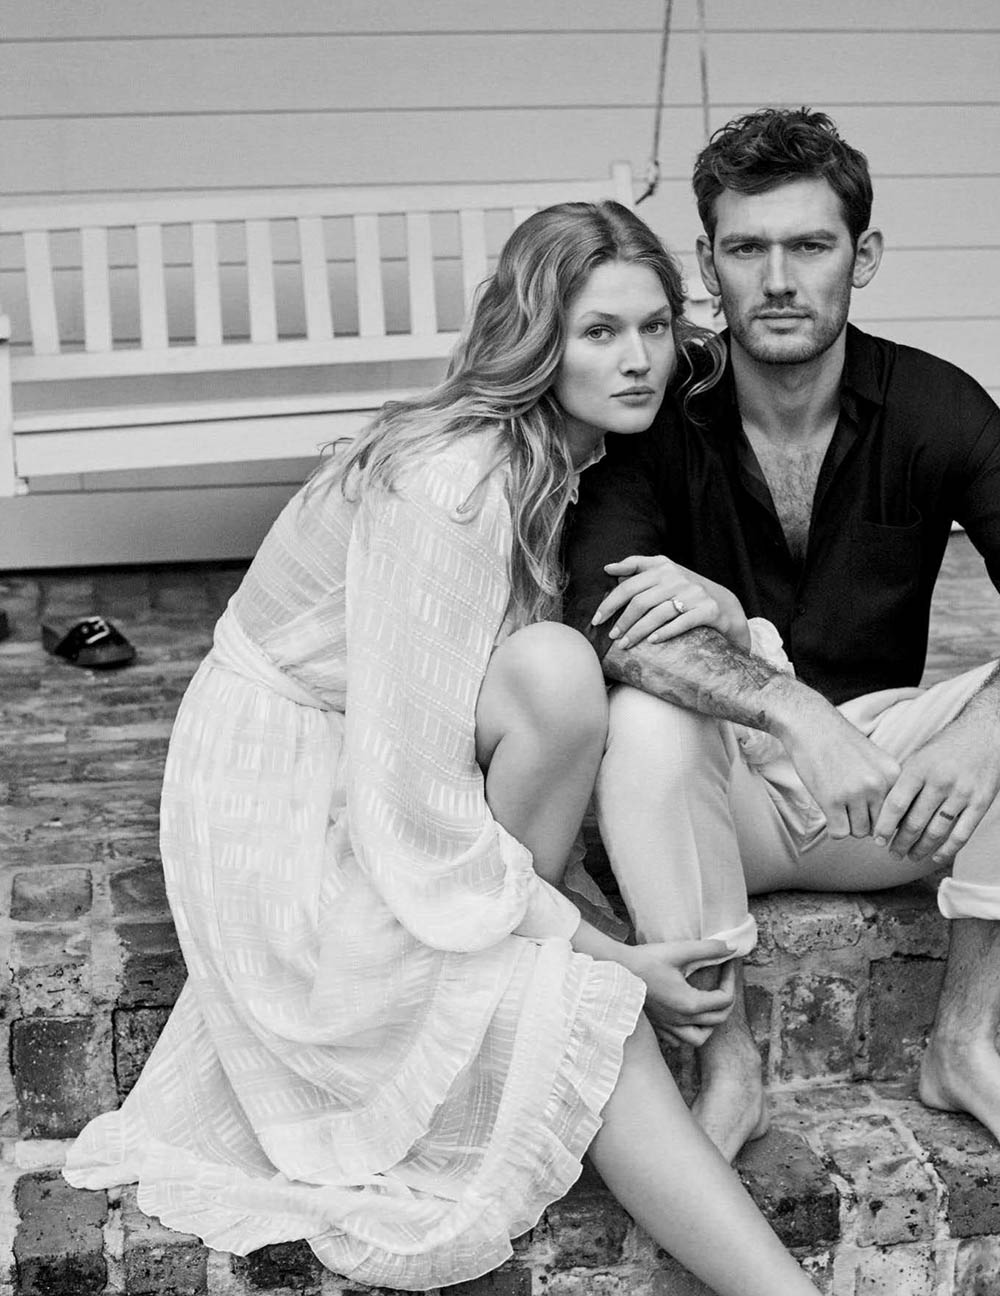 Toni Garrn and Alex Pettyfer cover Vogue Germany June 2020 by Giampaolo Sgura